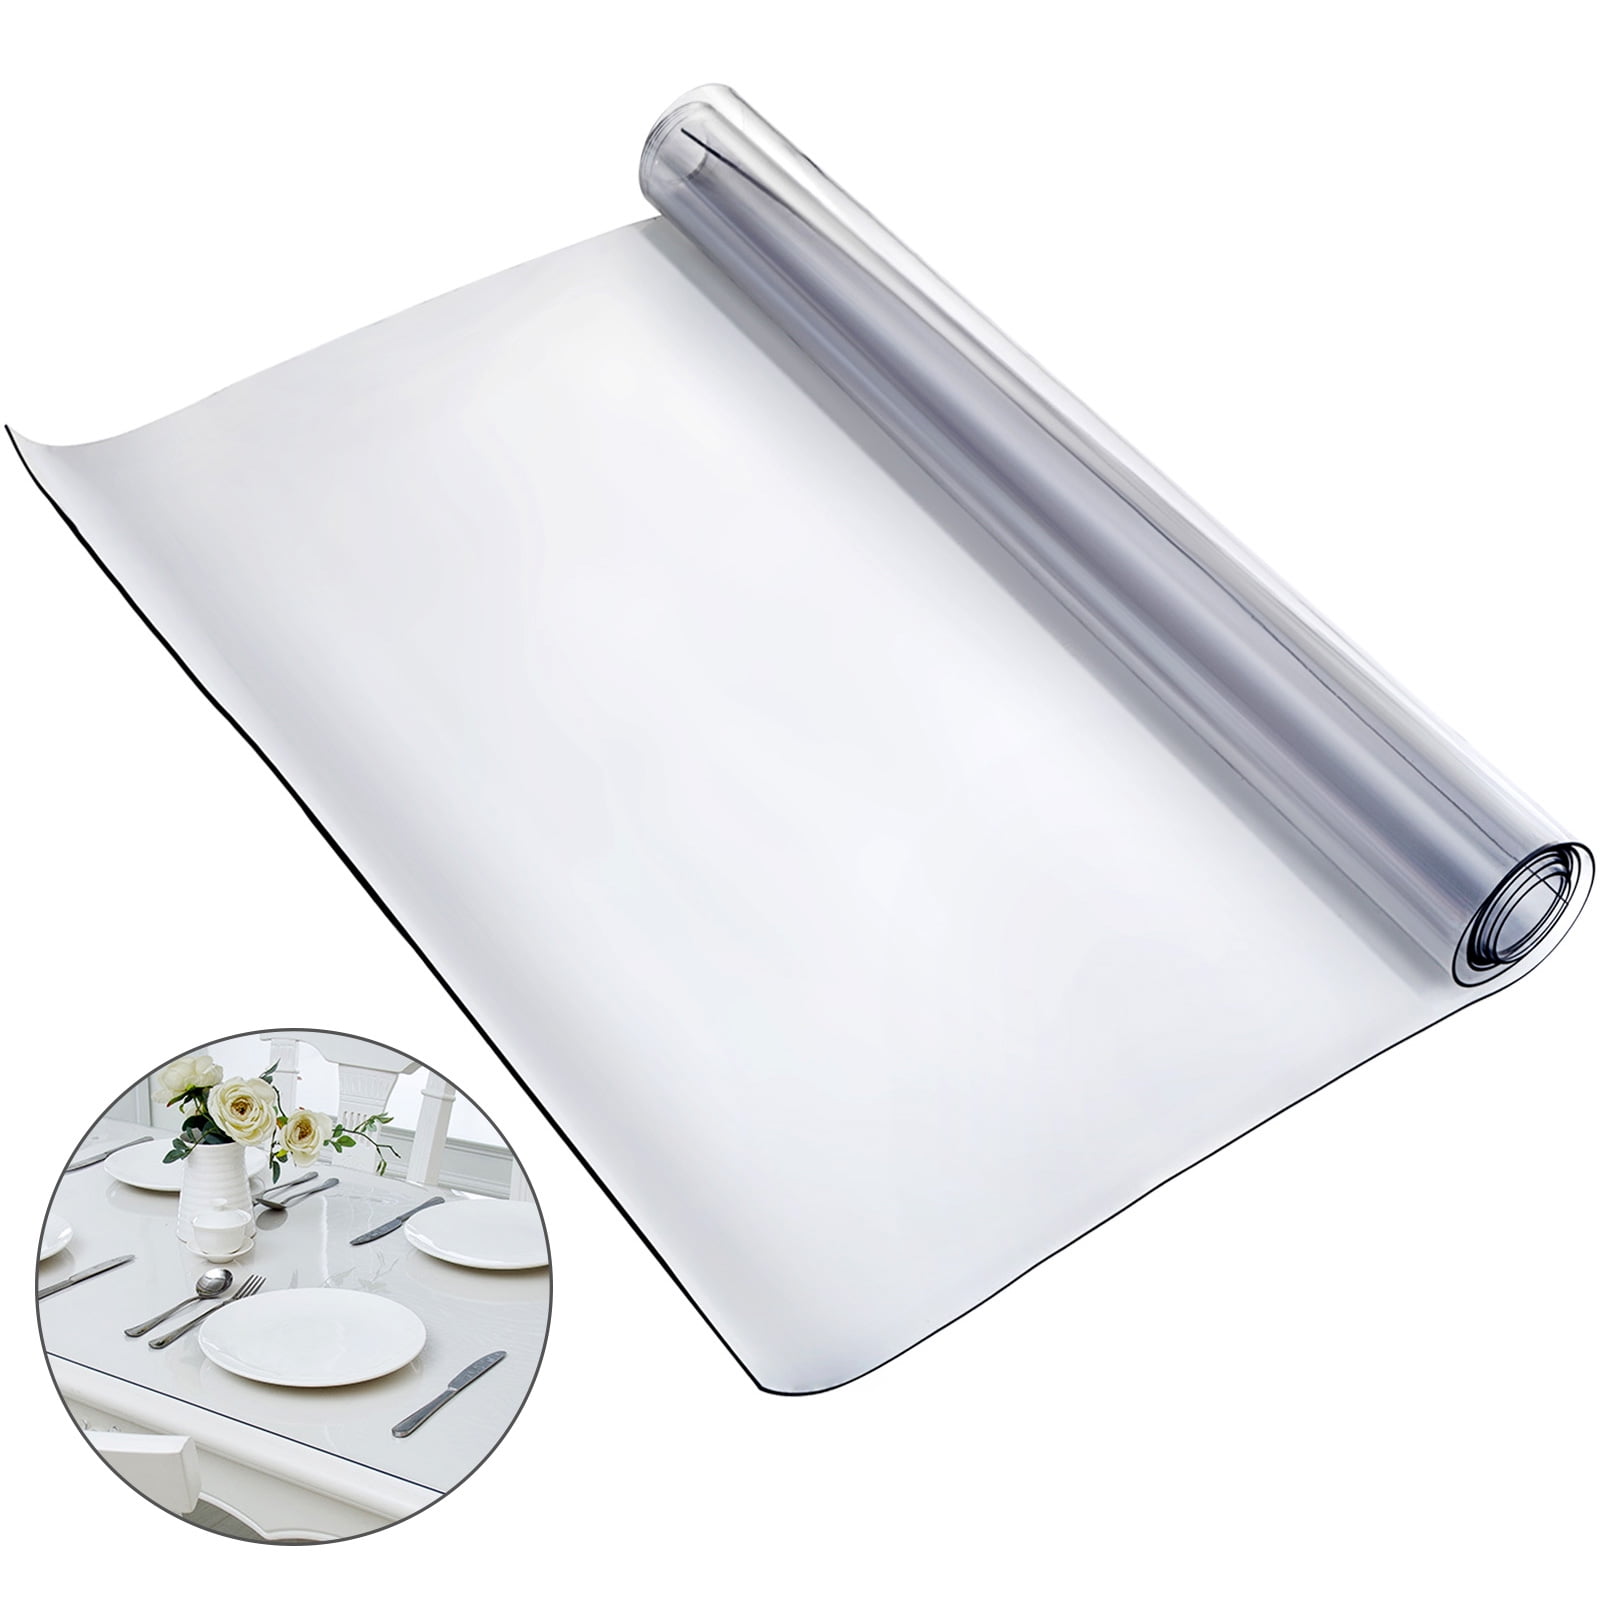 Plastic Table Cloth for Kitchen Wooden Table OstepDecor 90 x 44 Inch Clear Table Cover Protector 1.5mm Thick Table Pad for Dining Room Table Clear Table Cloth Cover Protector 